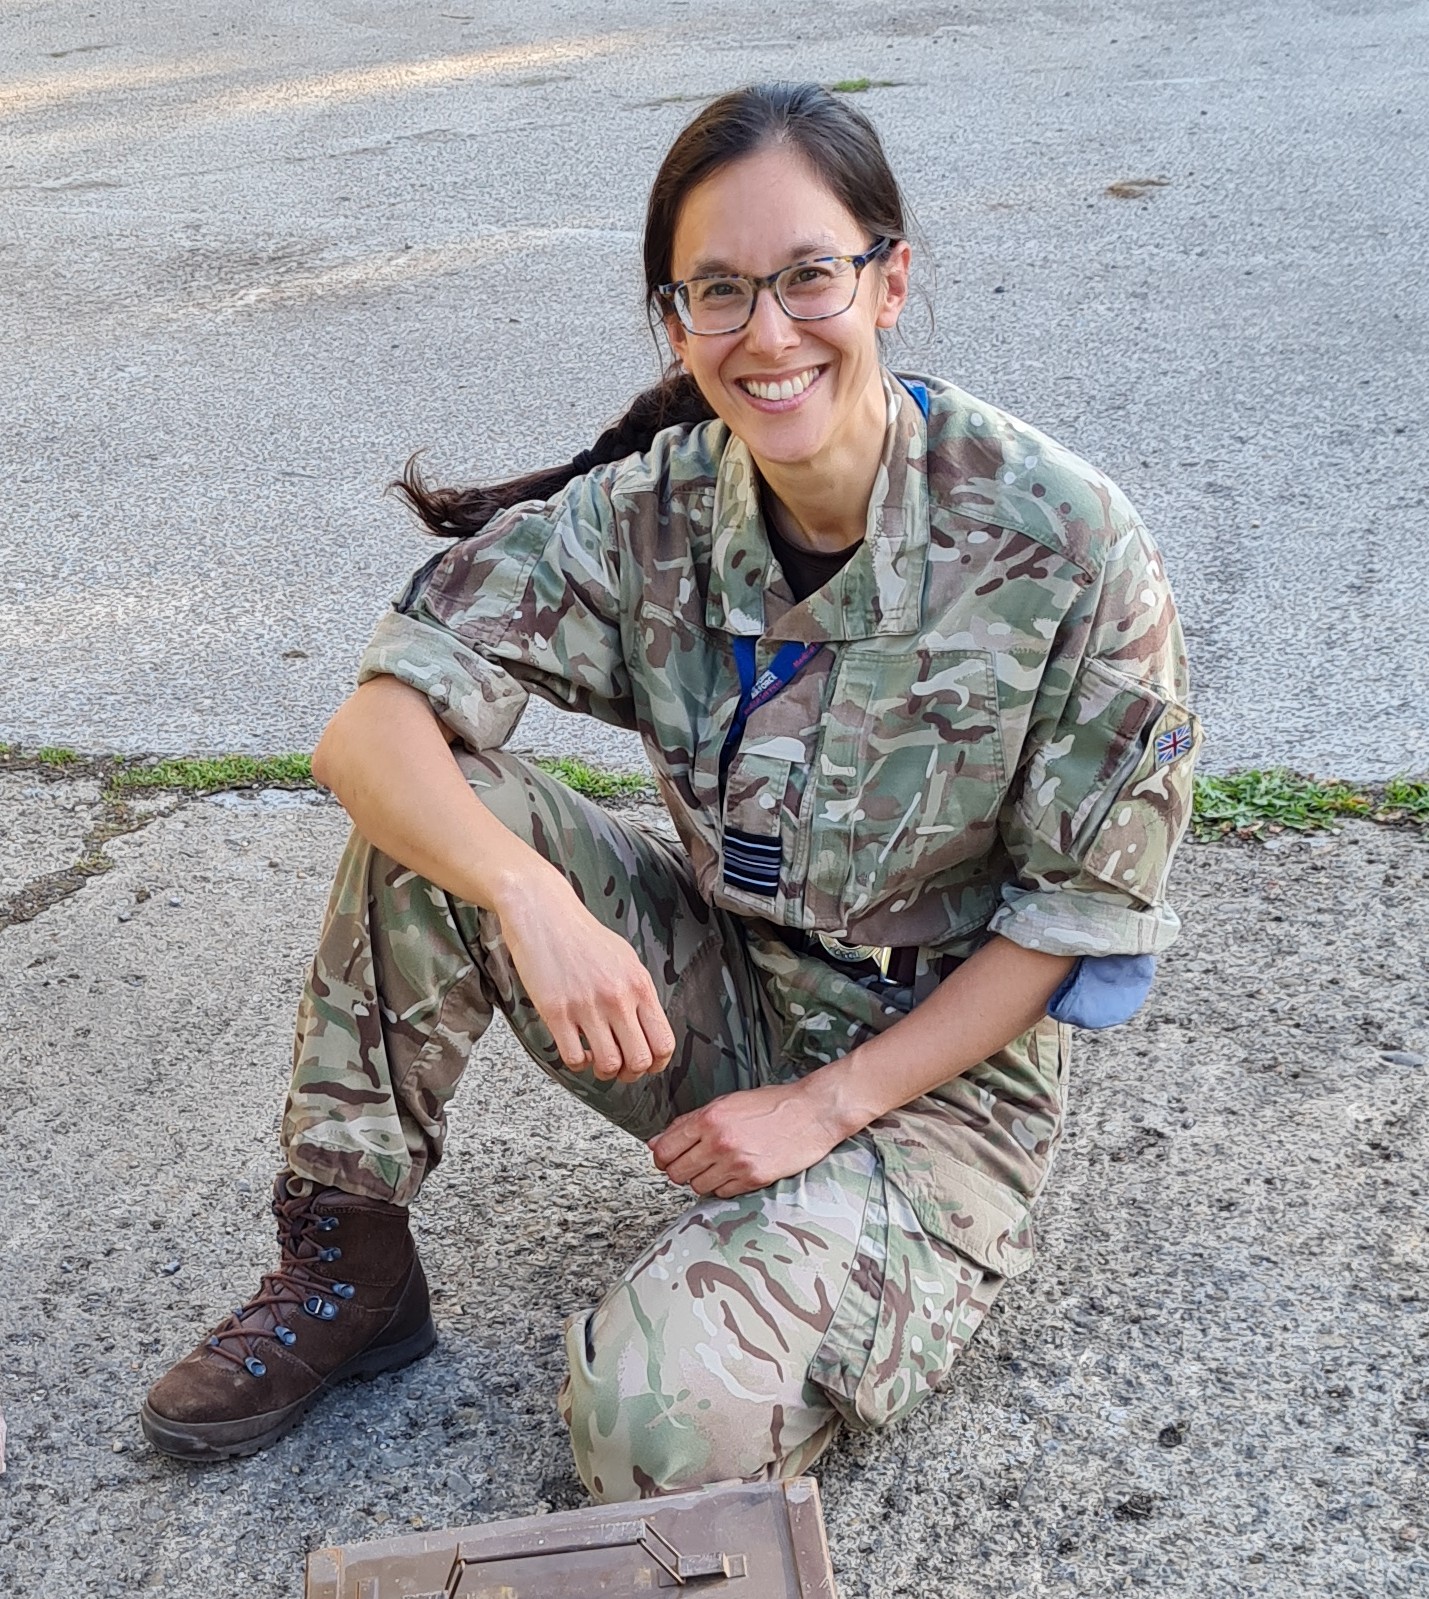 Squadron Leader Sophie Foxen – Chair of the Ministry of Defence Vegan and Vegetarian Network and Senior Medical OfficerSquadron Leader Sophie Foxen – Chair of the Ministry of Defence Vegan and Vegetarian Network and Senior Medical Officer